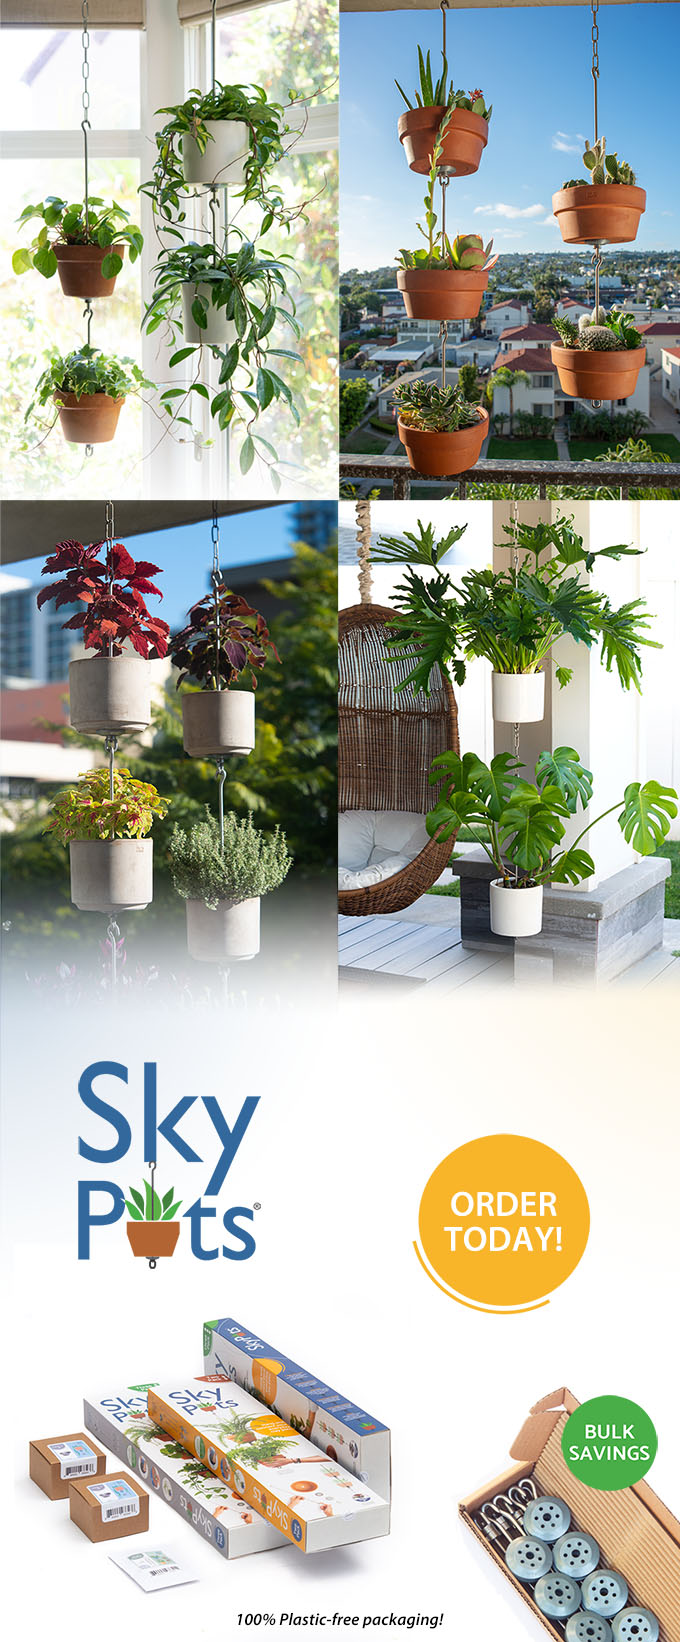 SkyPots arrangement collage with examples of product packaging. Order today! 100% Plastic free packaging.